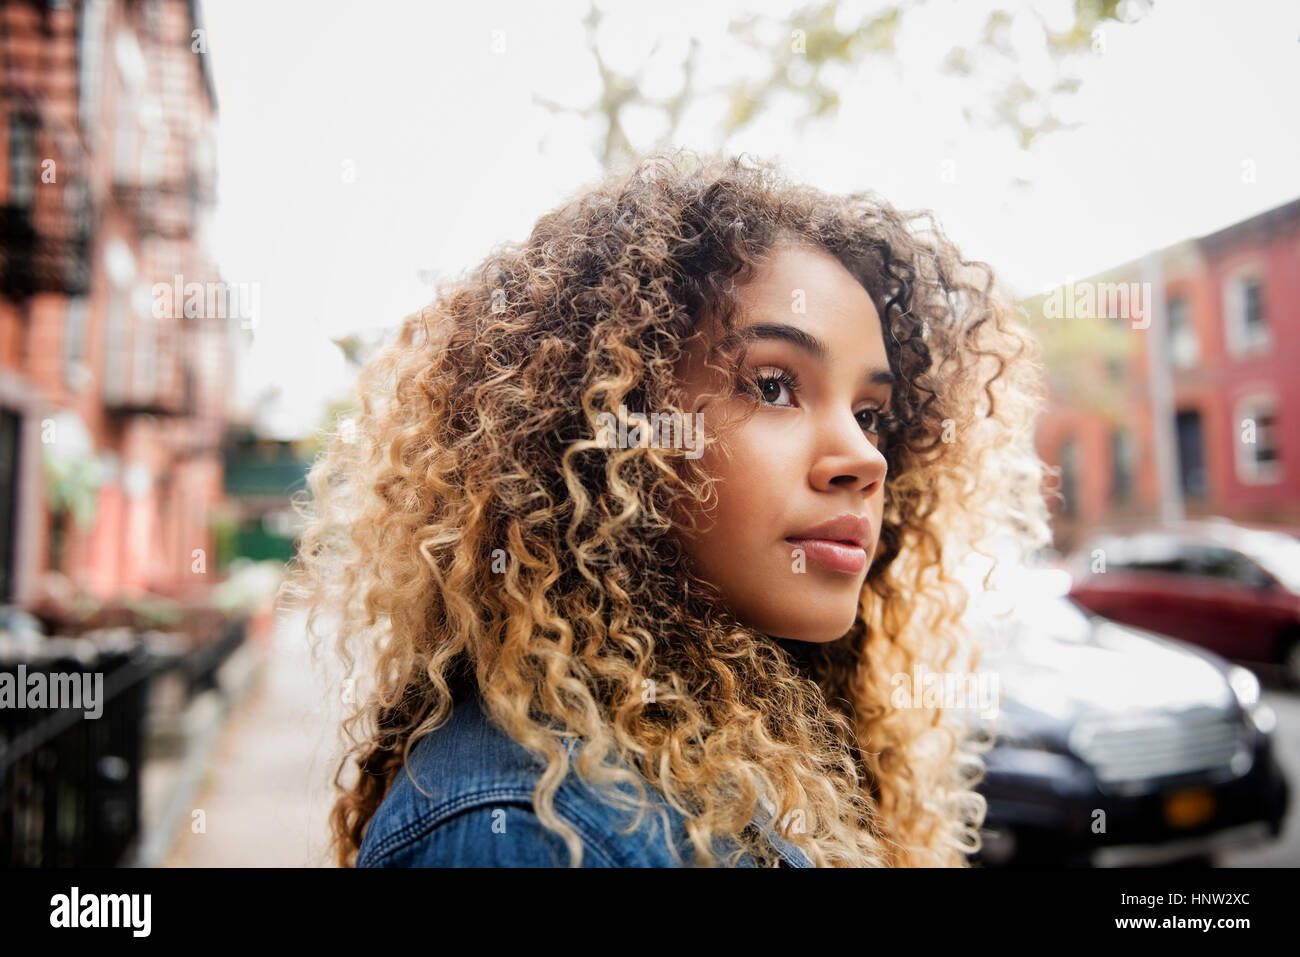 Pensive Mixed Race woman in city Stock Photo